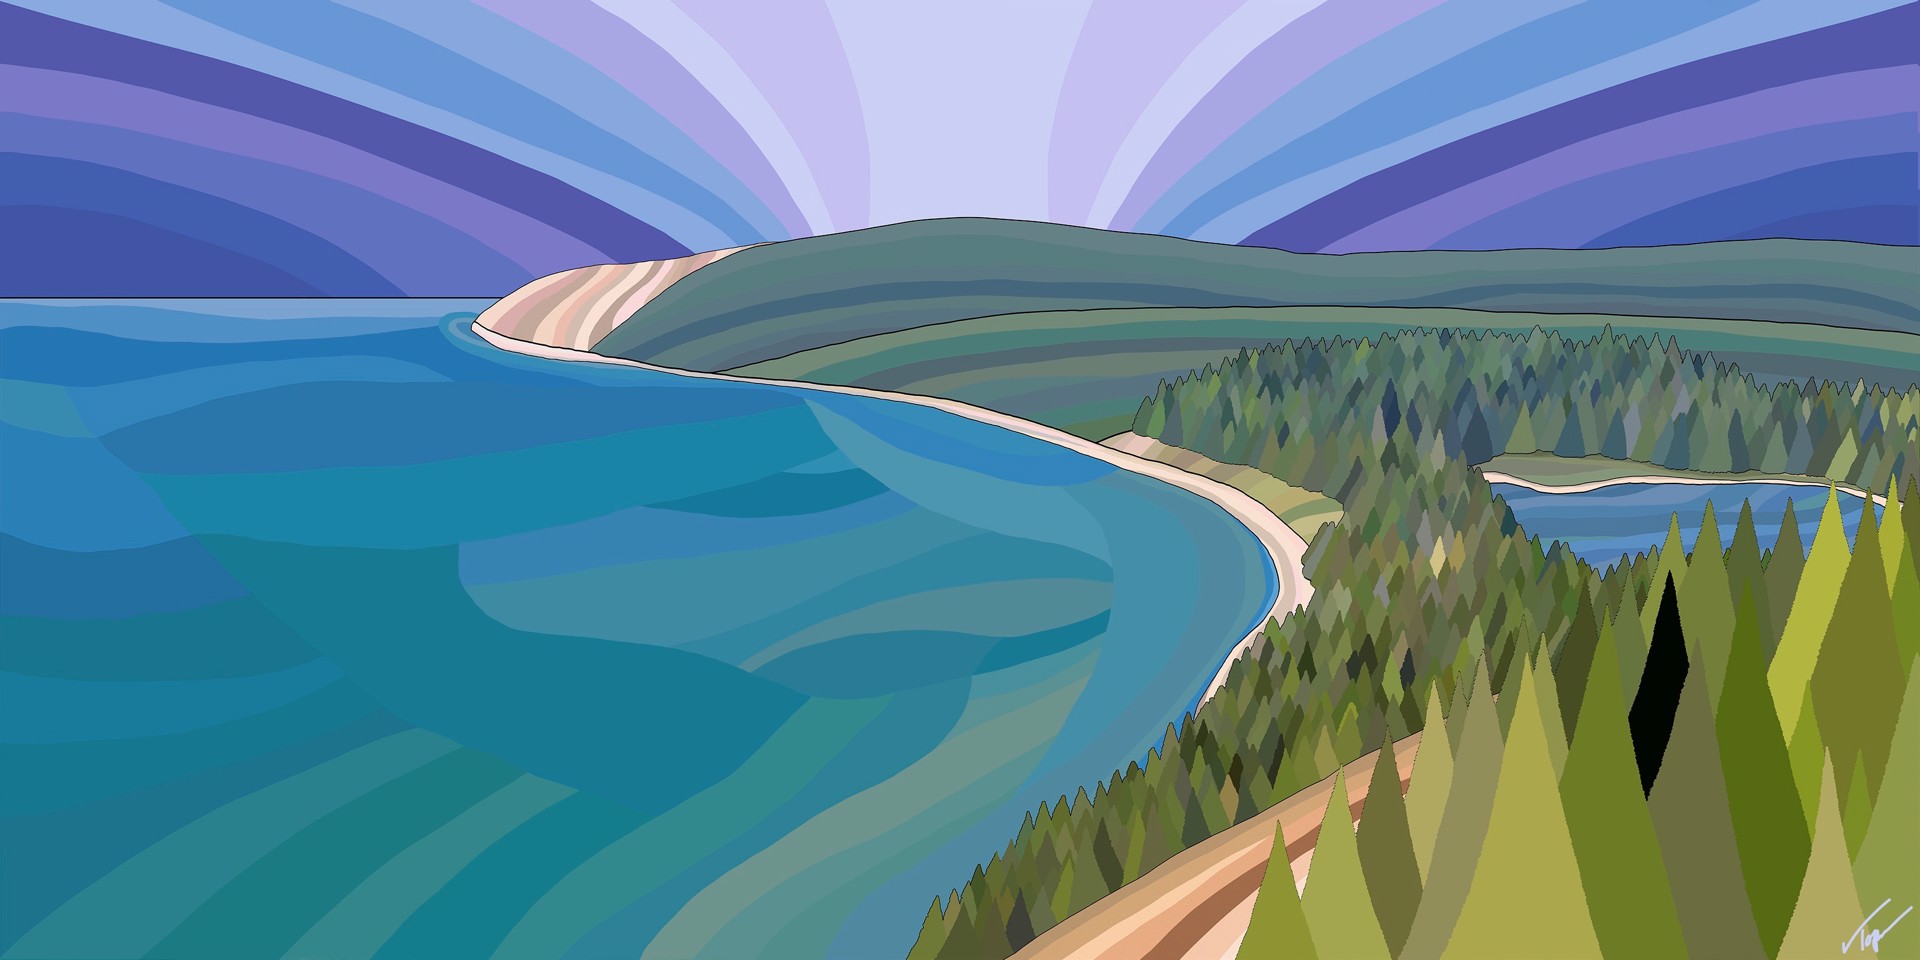 Sleeping Bear Dunes by Topher Straus